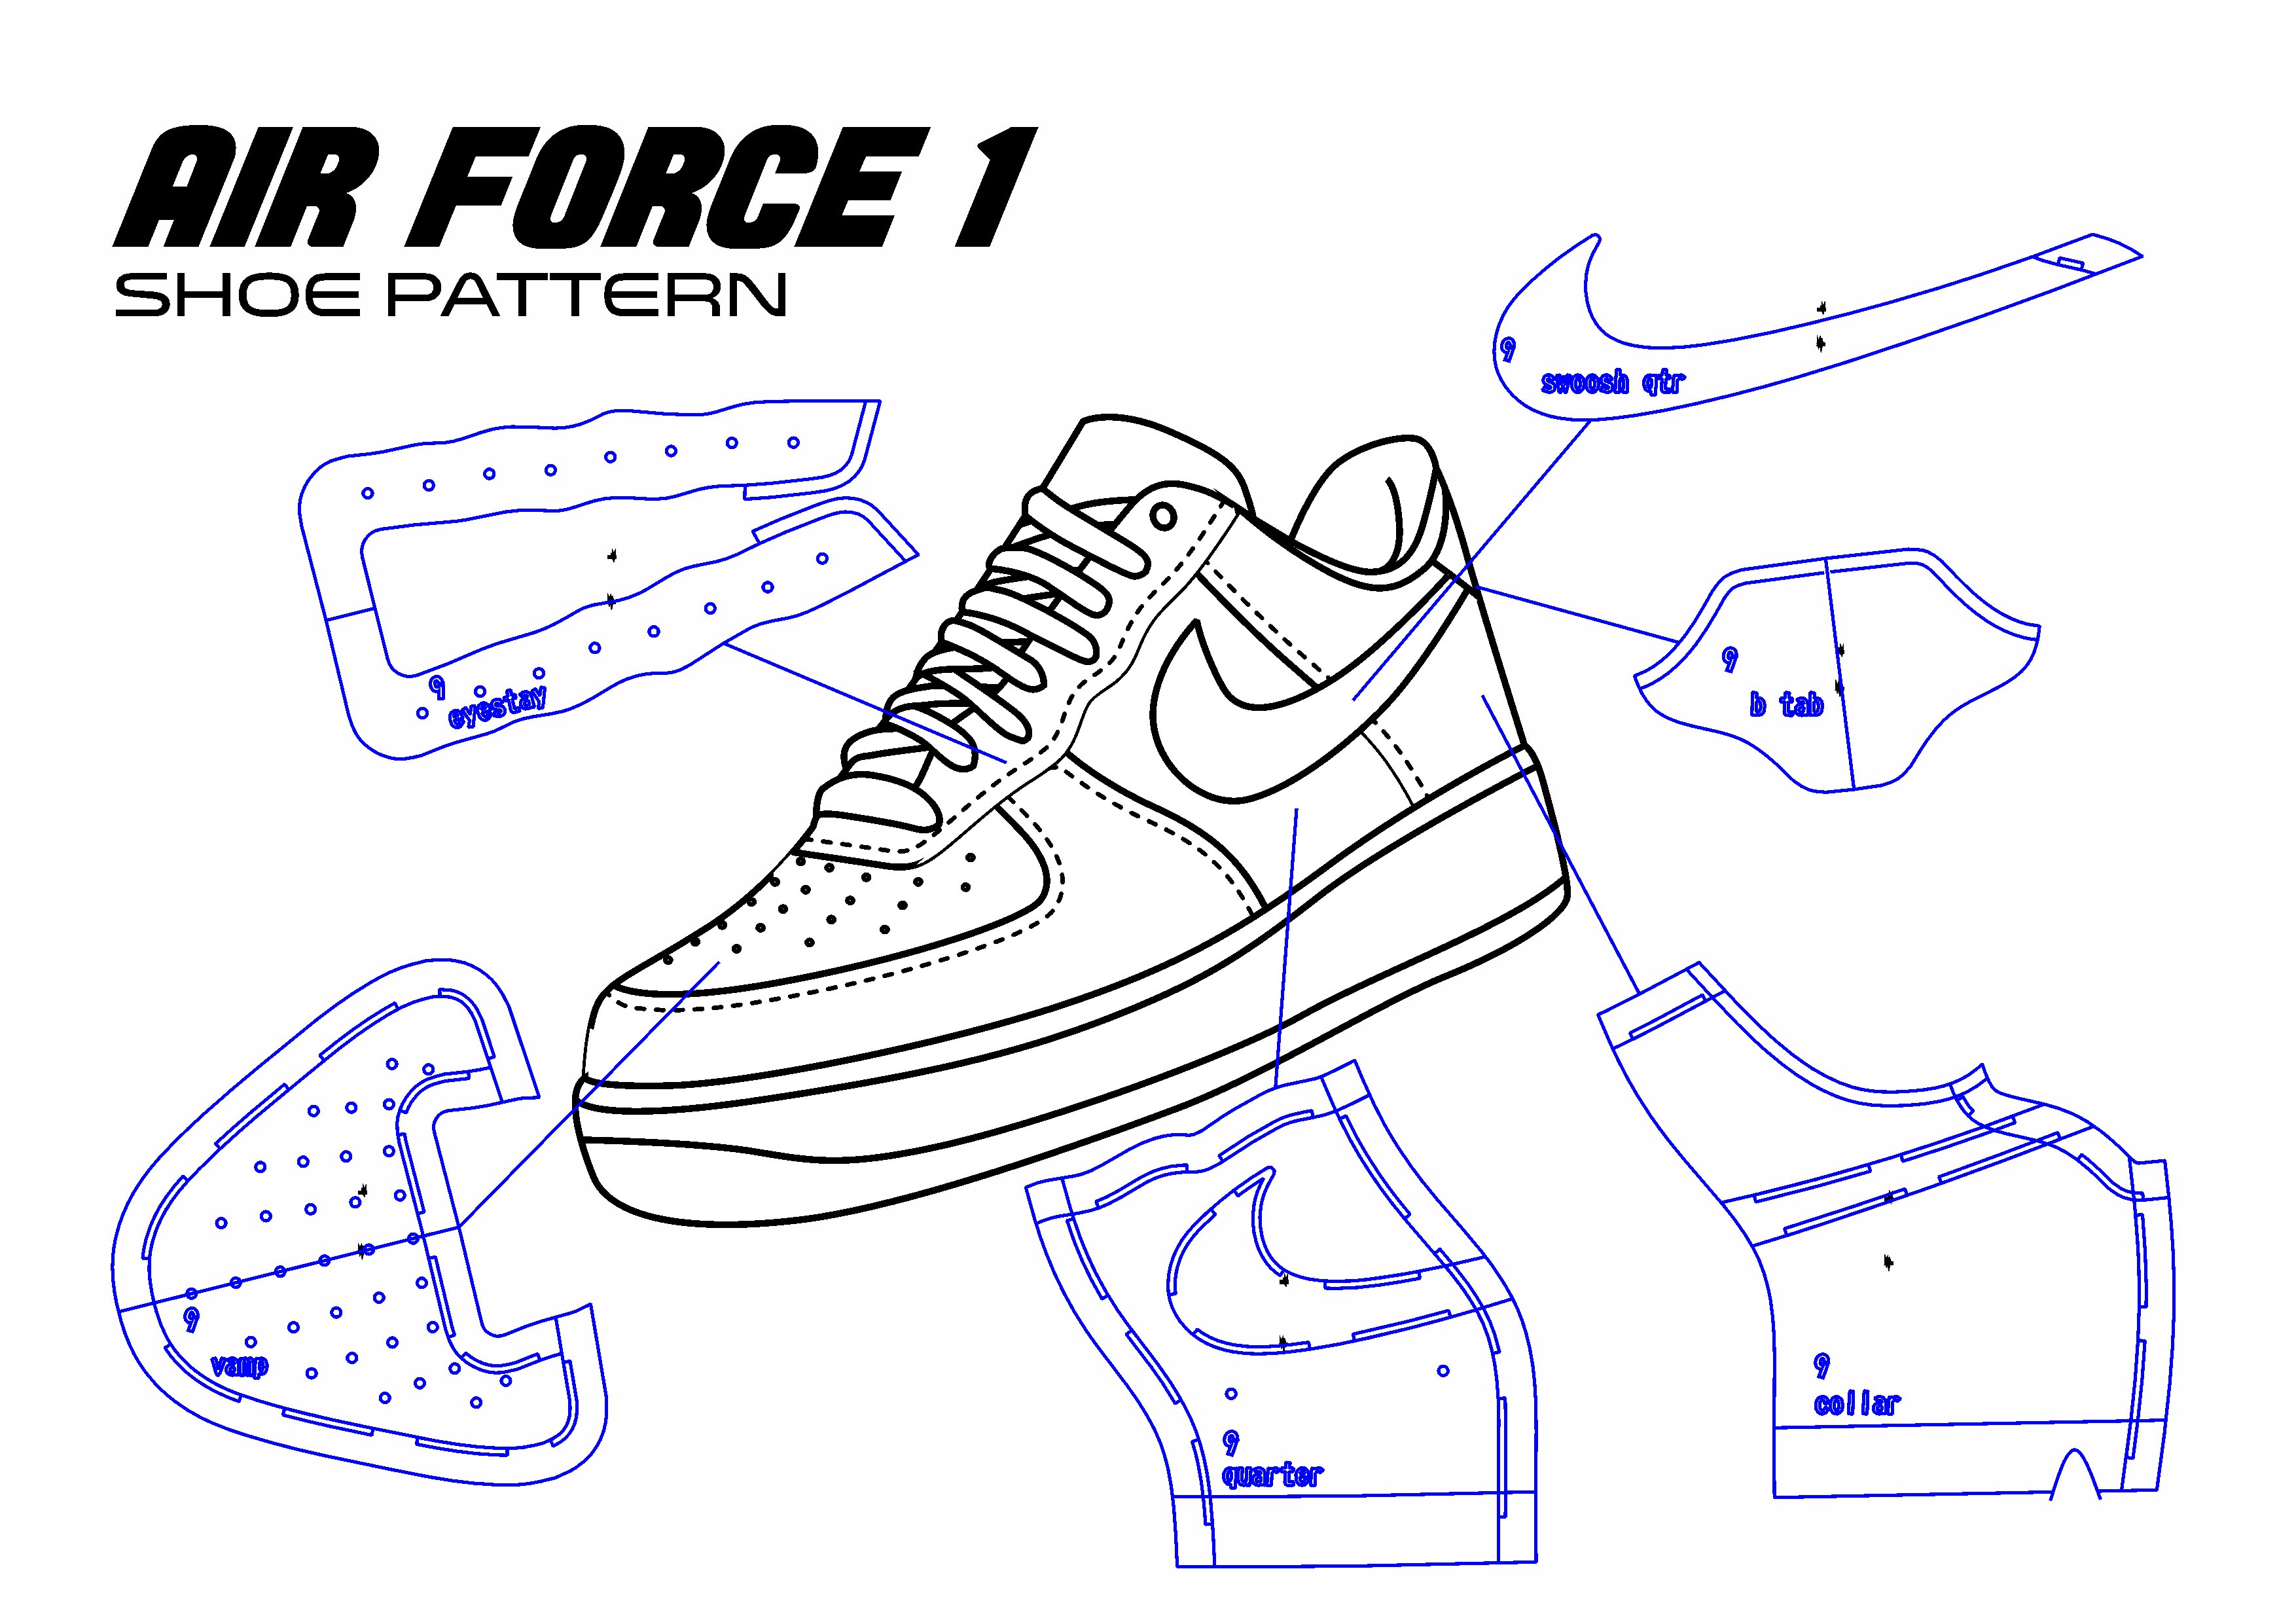 Apply Stencils To Nike AF1s- Applying Stencils to Leather Shoes 